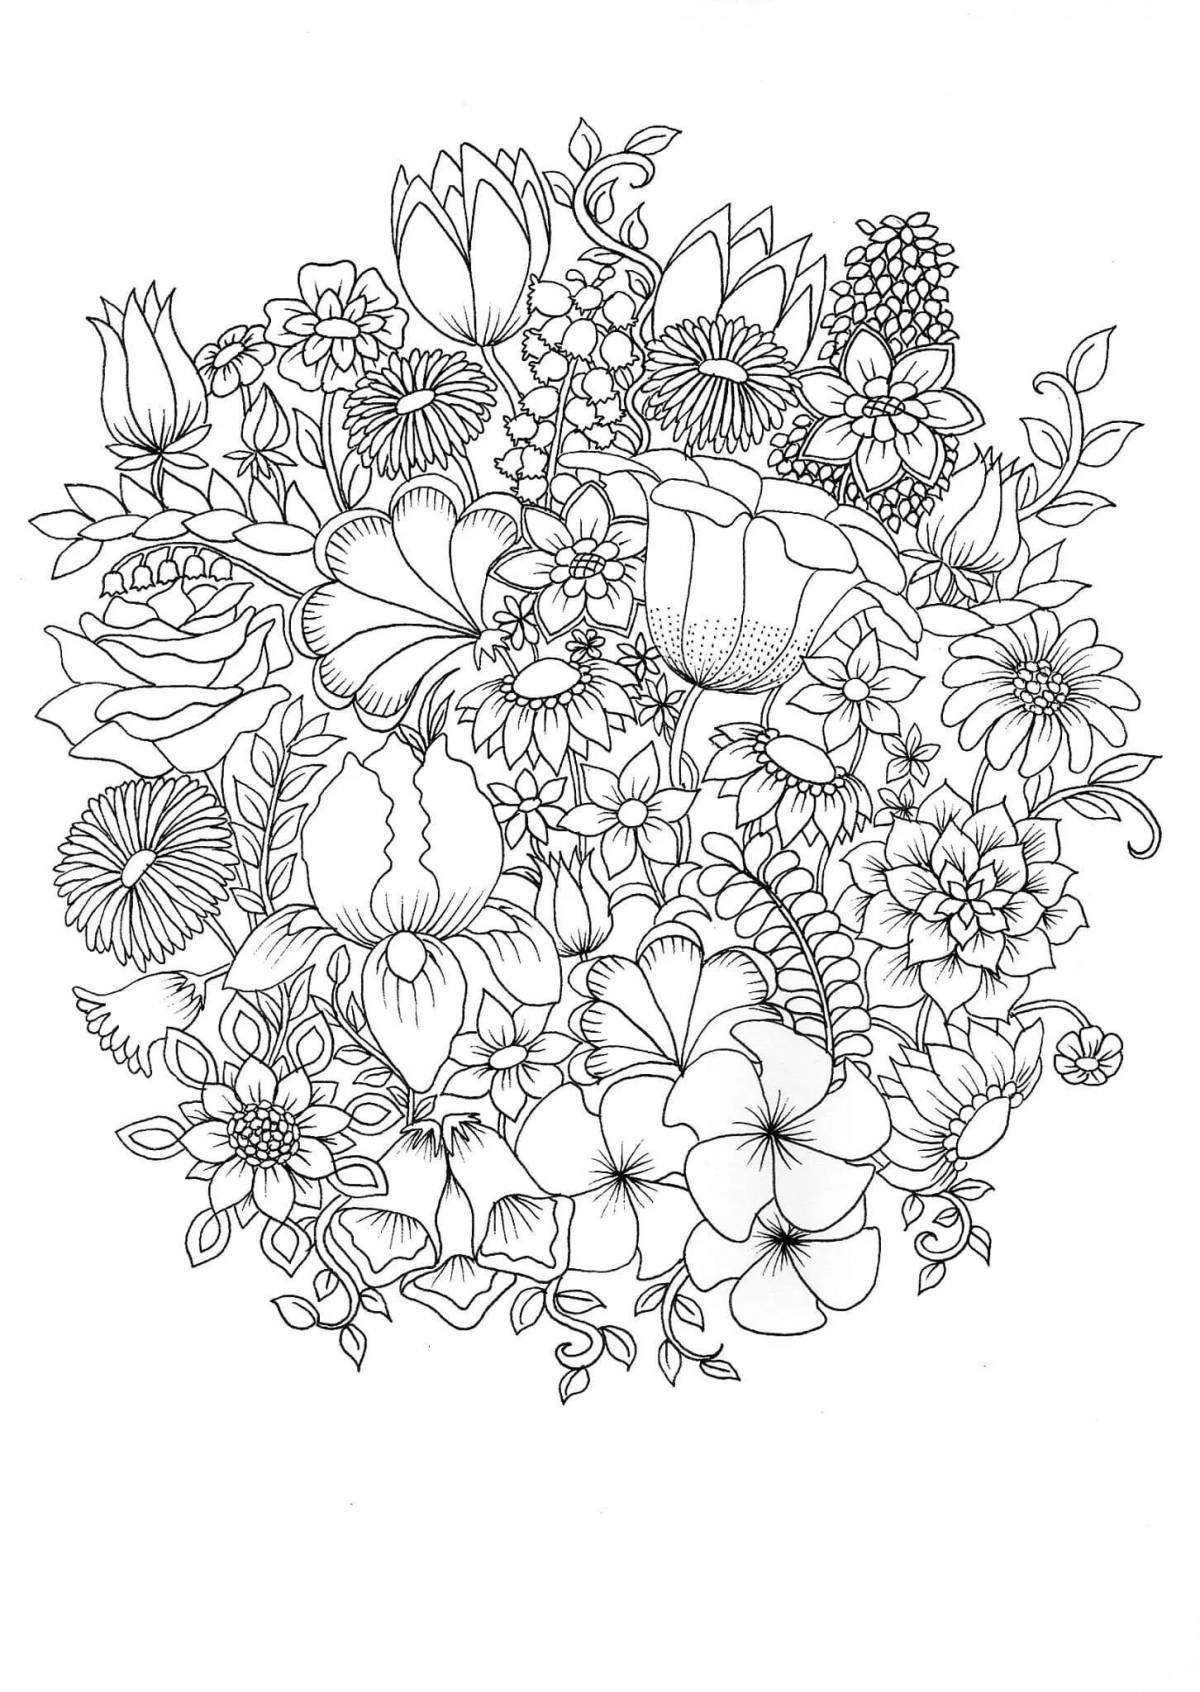 Amazing complex flower coloring book